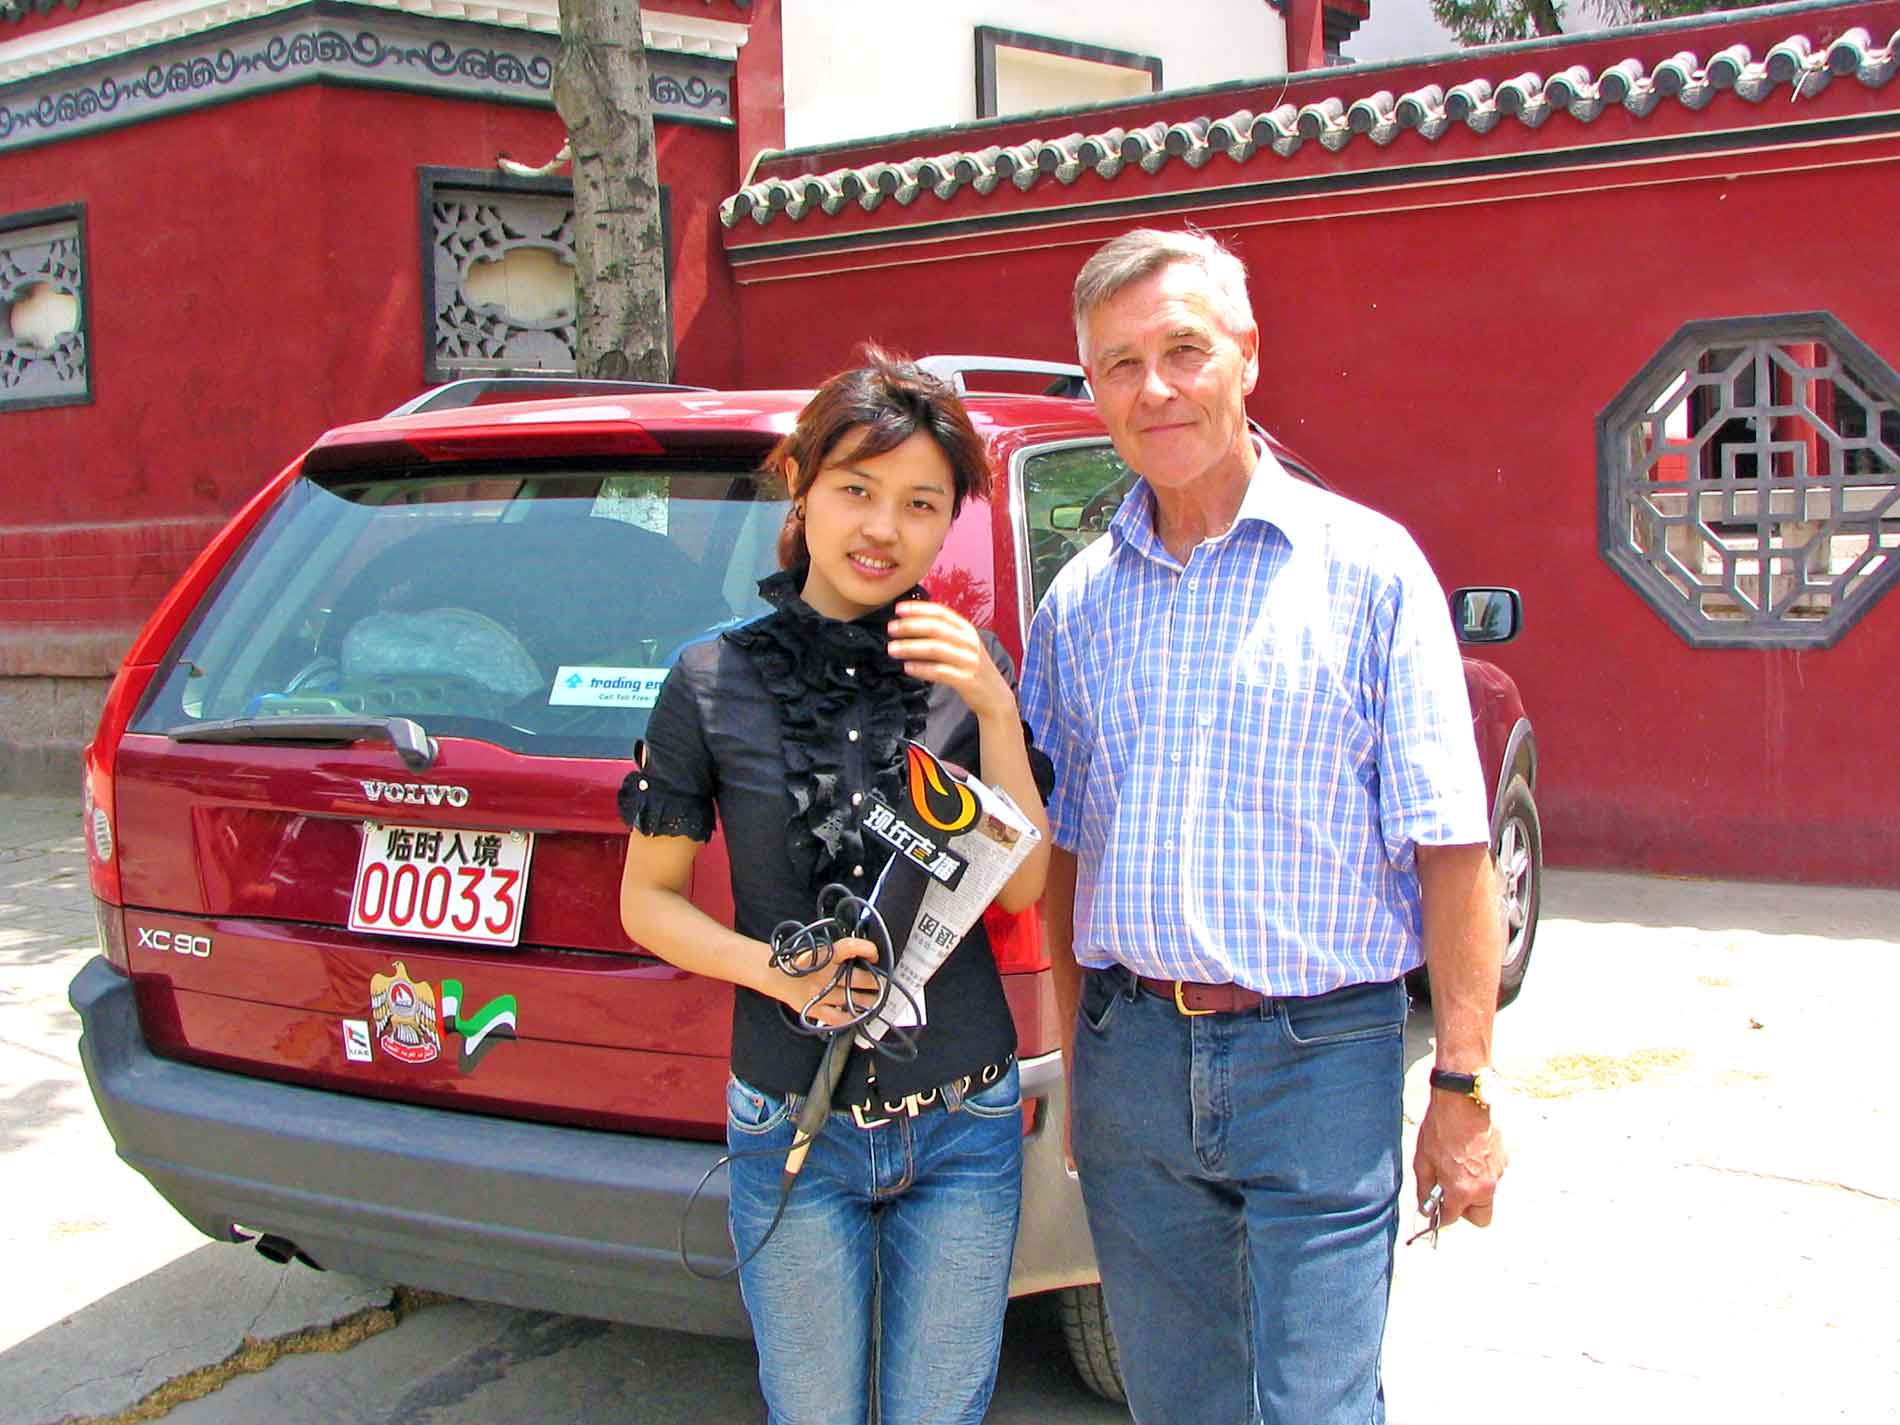 TV Reporter After Interviewing me at Yitang